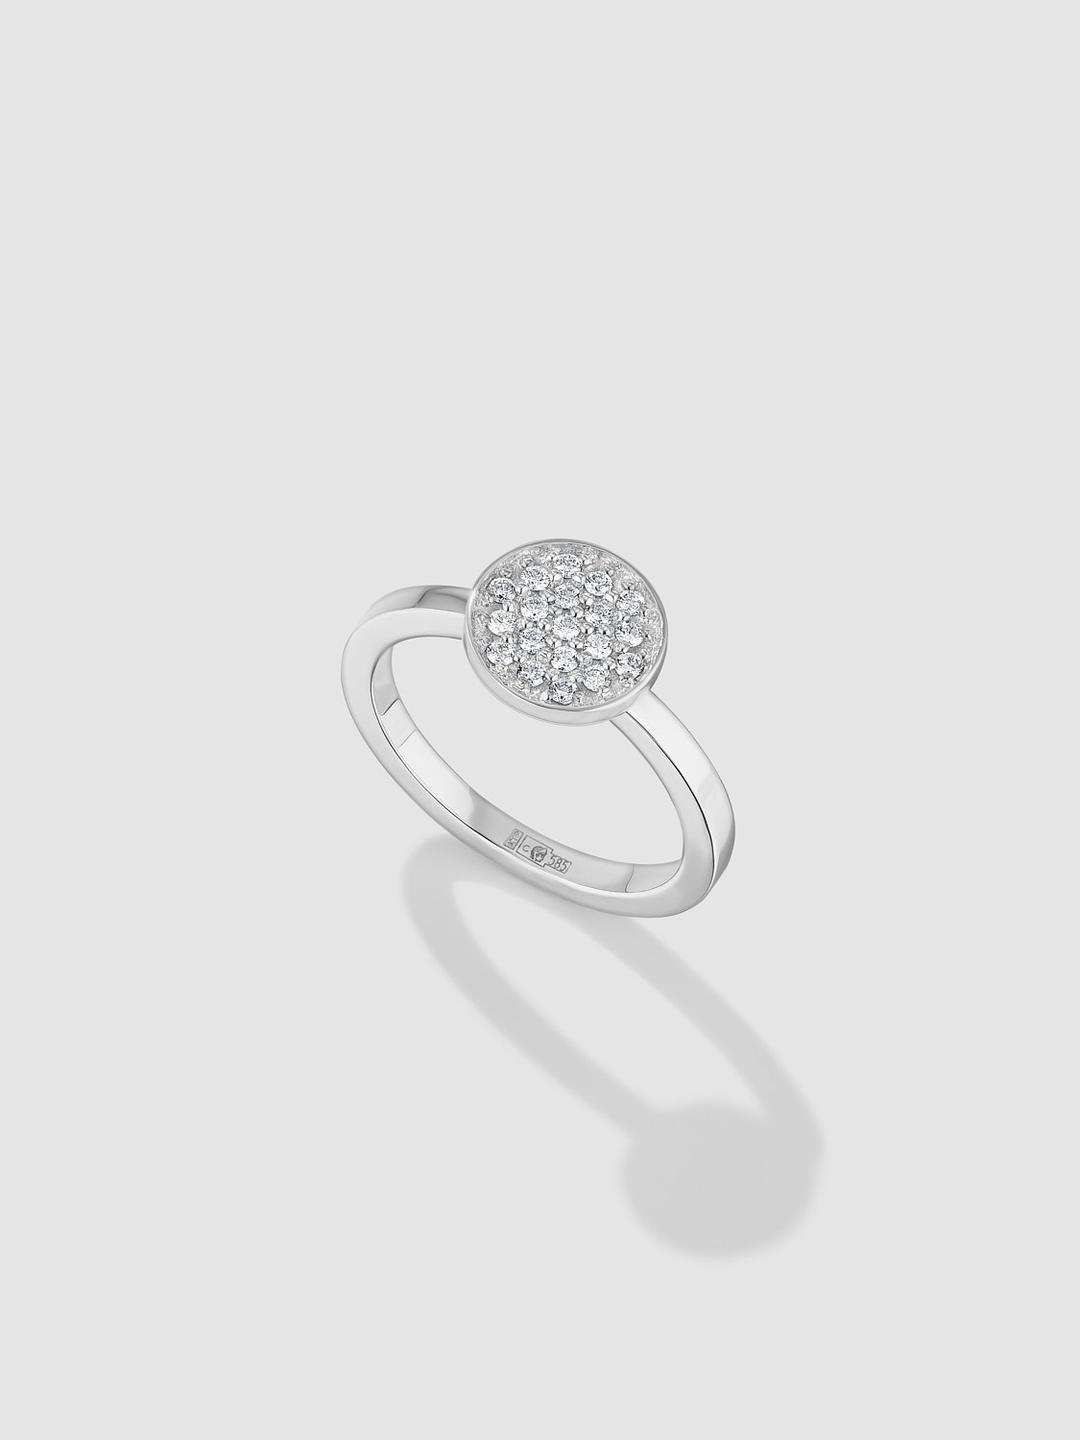 Engagement Pave Ring in White Gold